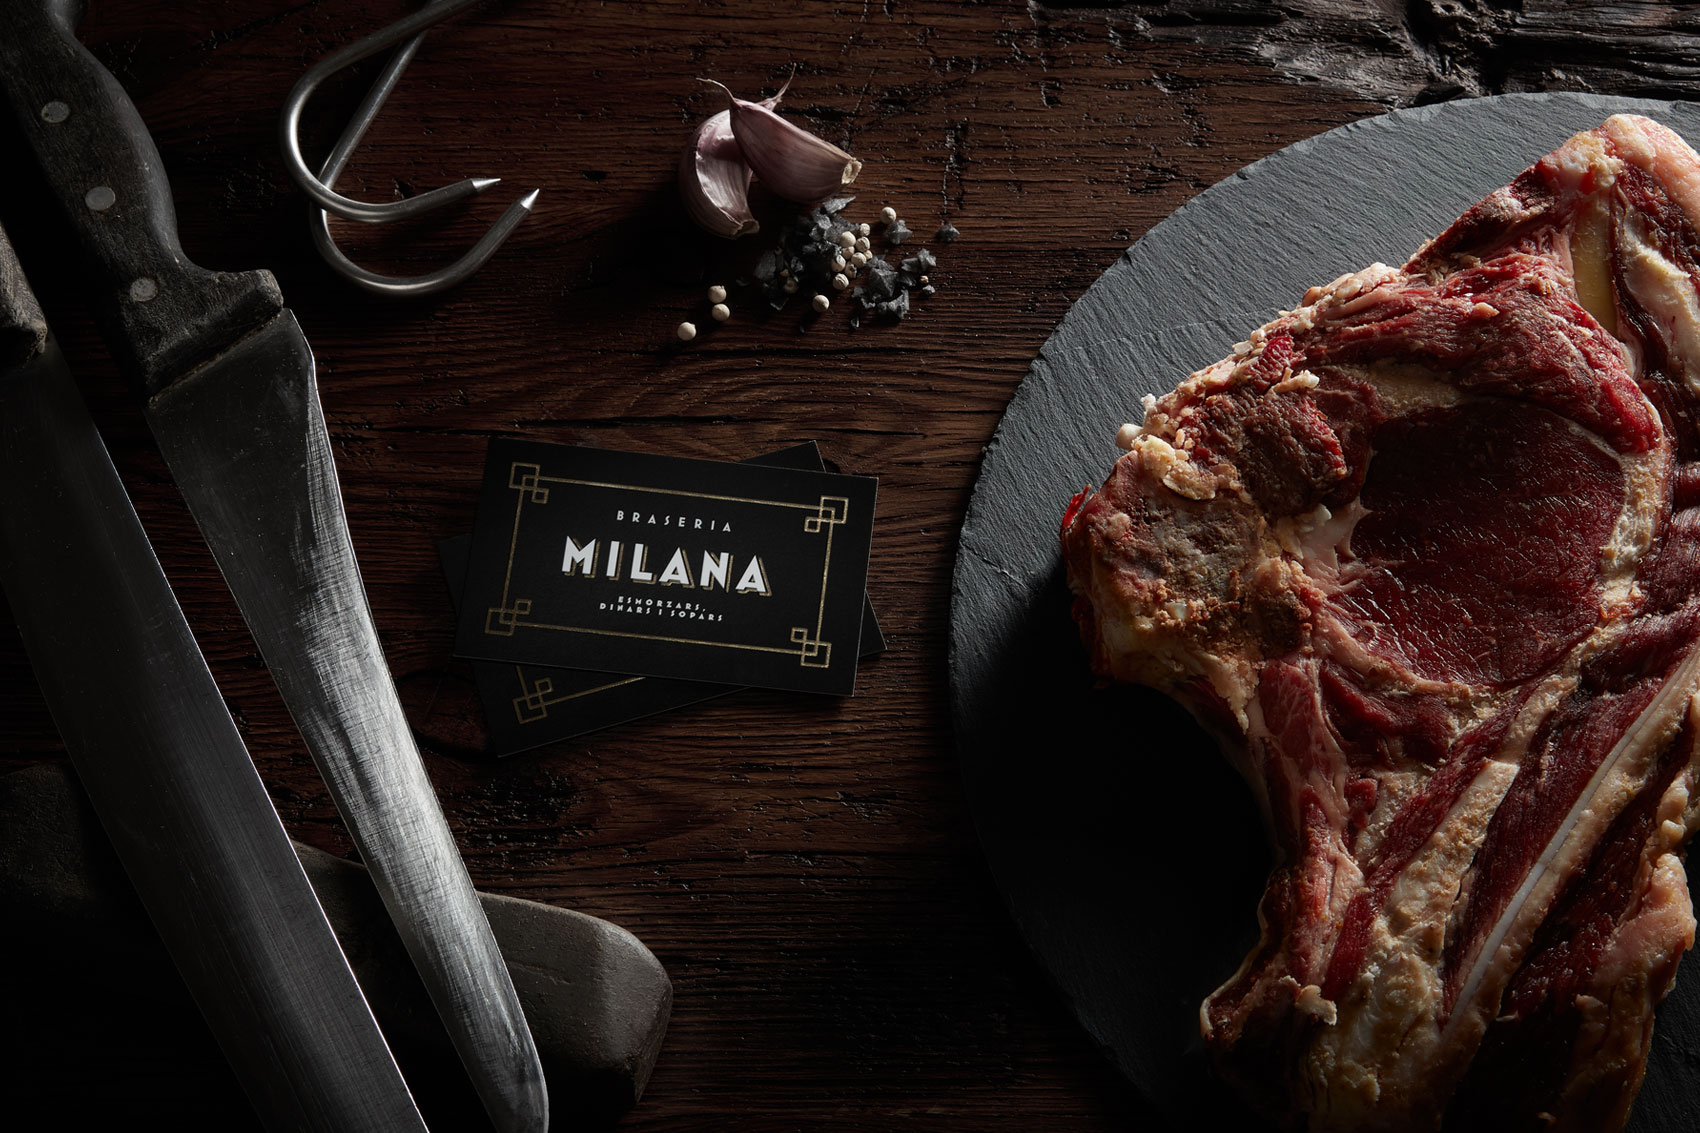 Business card with new logo of restaurant grill Braseria La Milana next to t-bone steak and knife